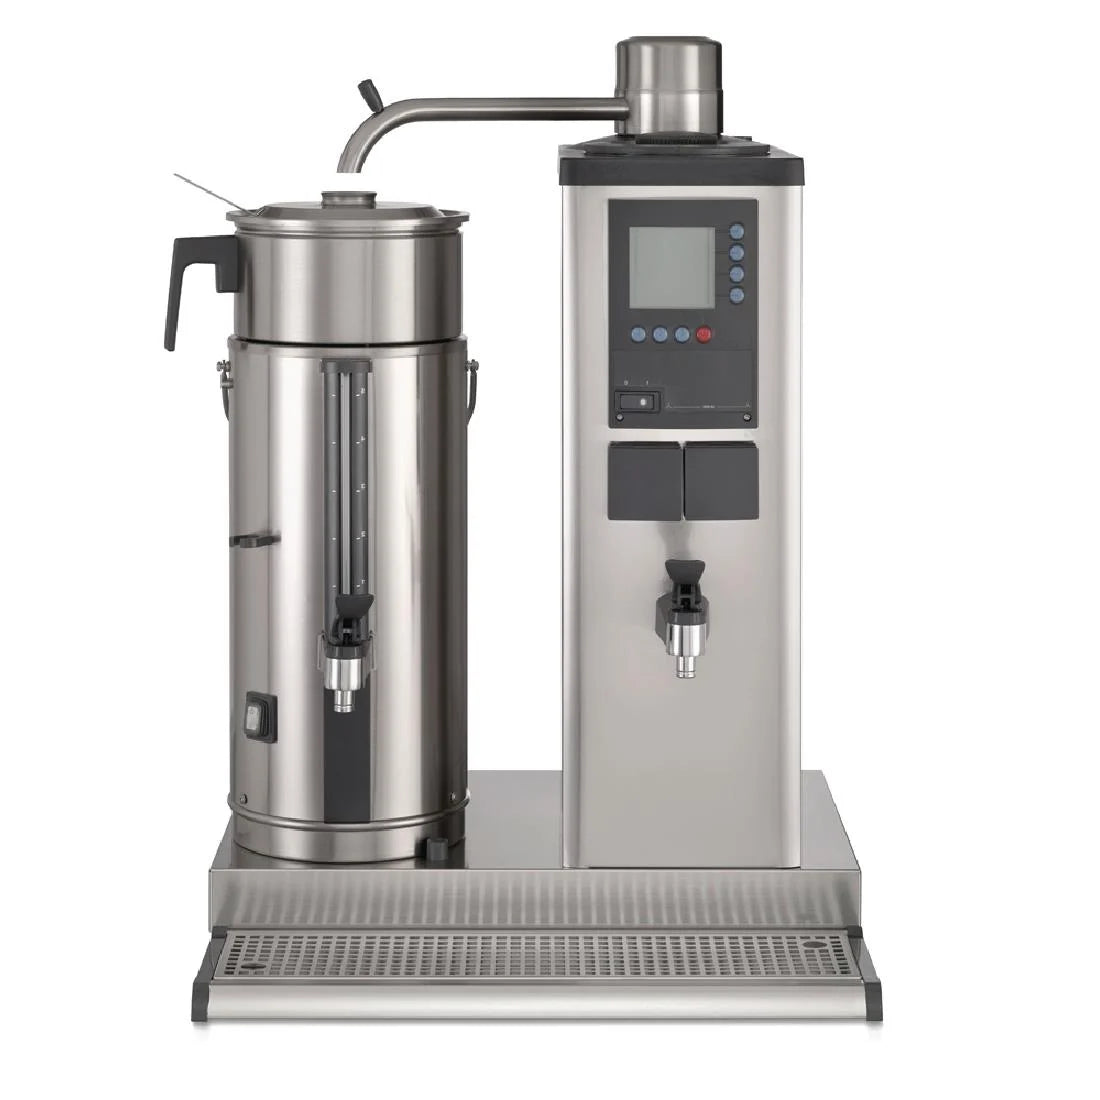 Bravilor B20 hwl bulk coffee brewer with 20ltr coffee urn and hot watertap 3 phase Bravilor B20 HWL Bulk Coffee Brewer with 20Ltr Coffee Urn and Hot Water Tap 3 Phase.Product Ref:00559.MODEL:B20 HWL.🚚 3-5 Days Delivery